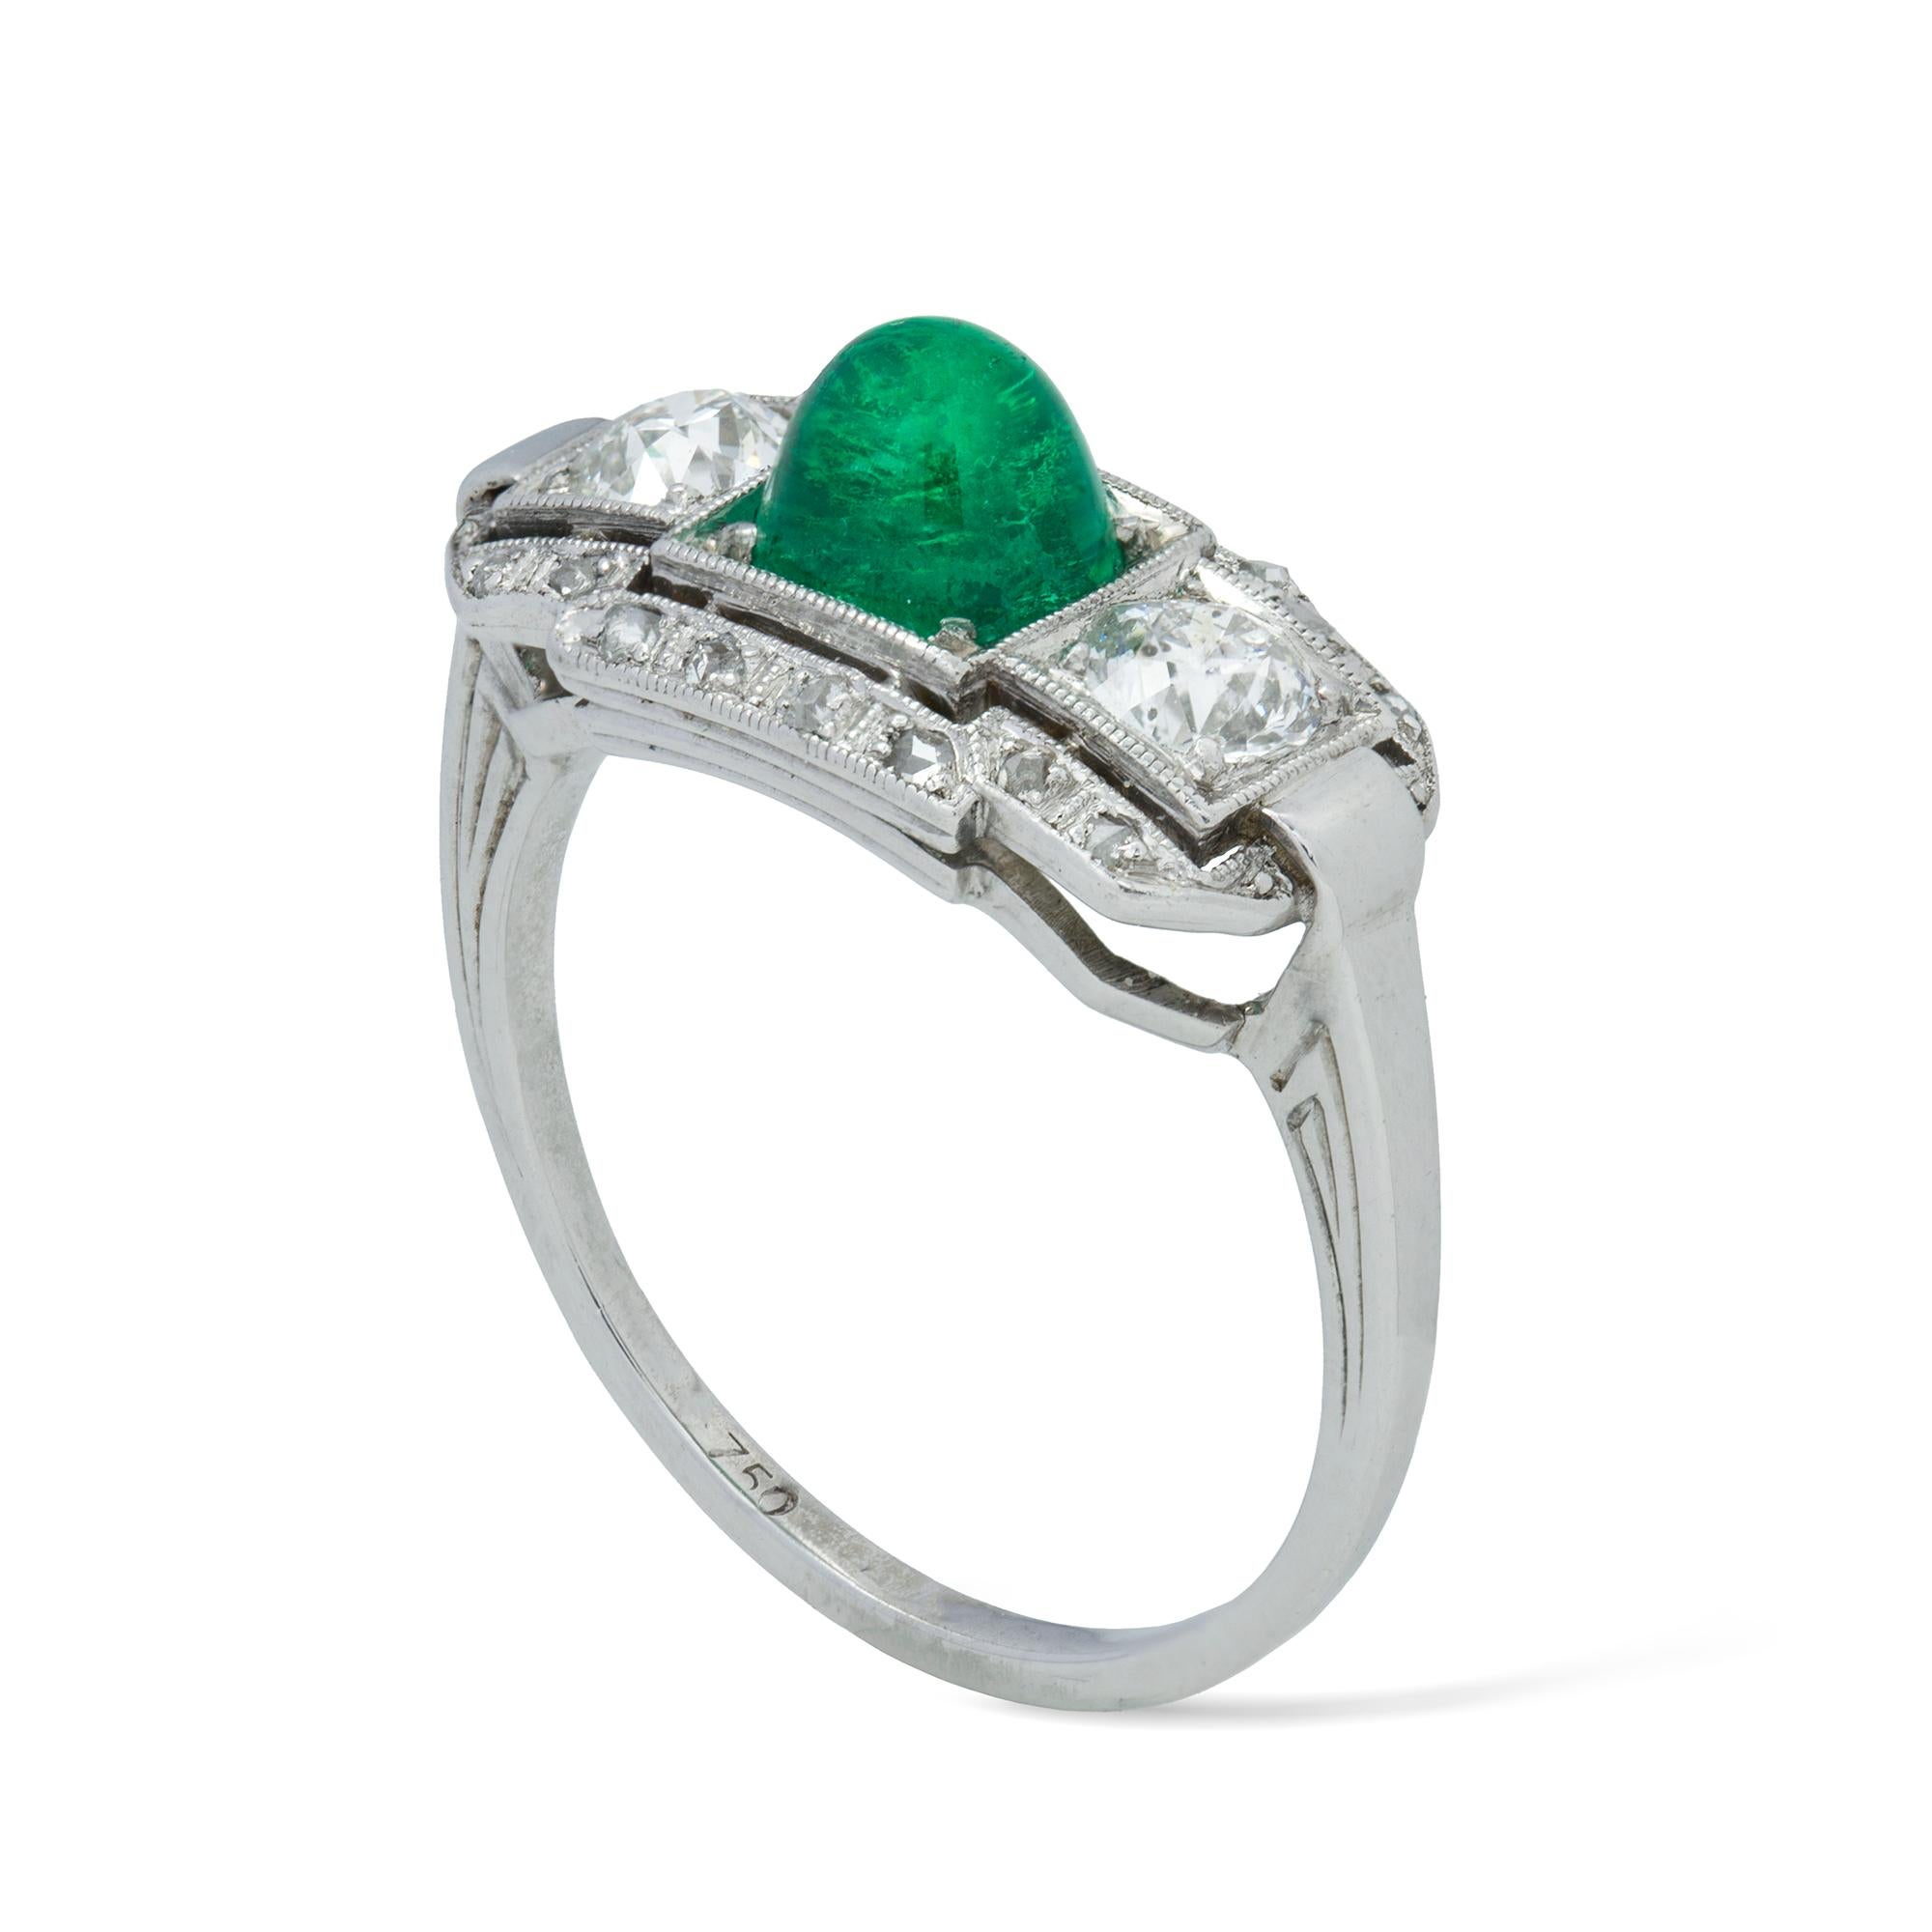 An Art Deco cabochon emerald and diamond ring, the central cabochon cut emerald estimated to weigh 1.1 carats accompanied by GCS Report stating that is of Colombian origin, flanked by two old brilliant-cut diamonds, surrounded by a row of small rose